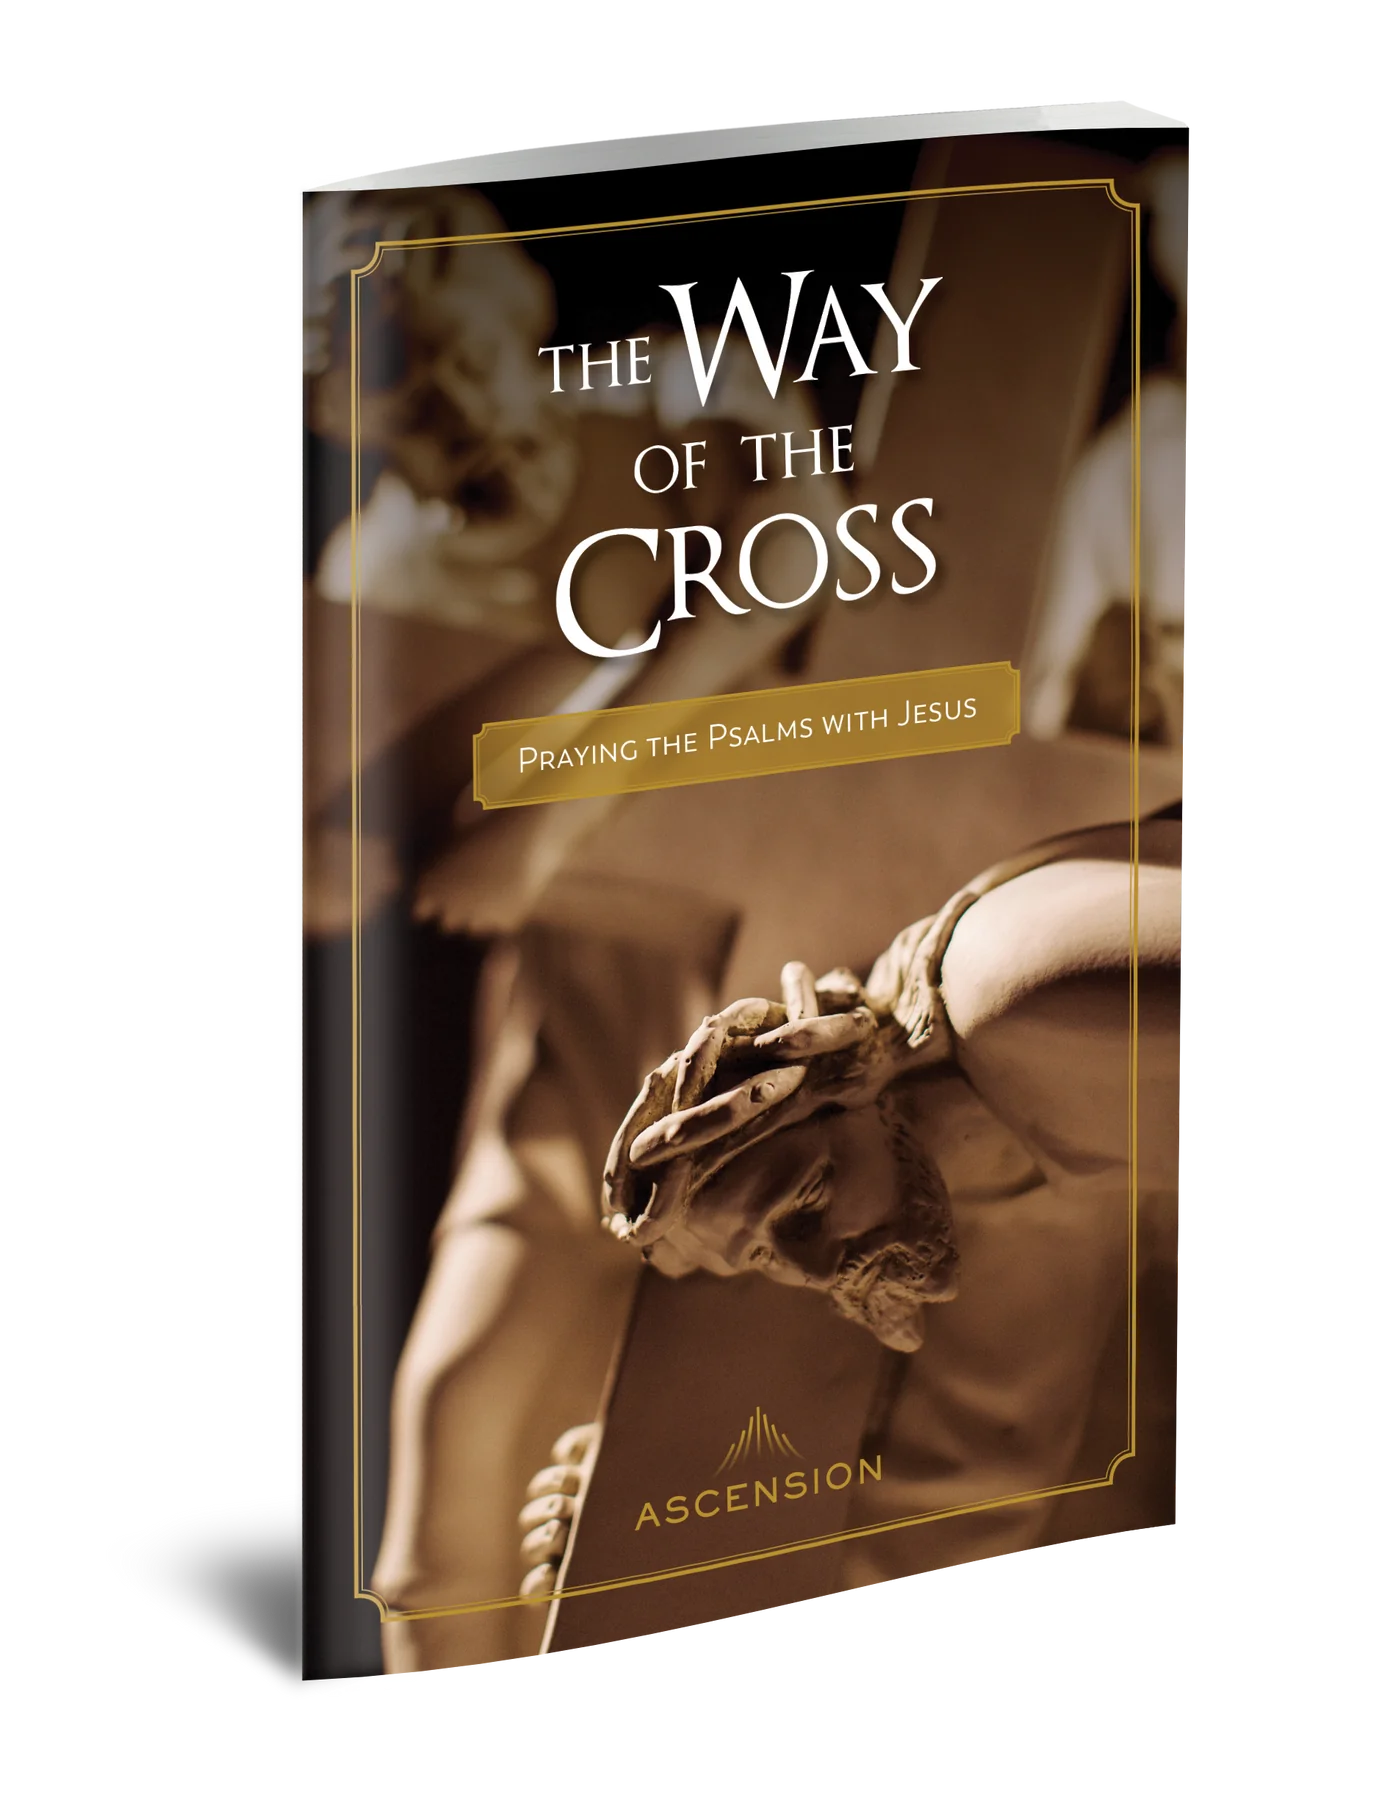 The Way of the Cross: Praying the Psalms with Jesus